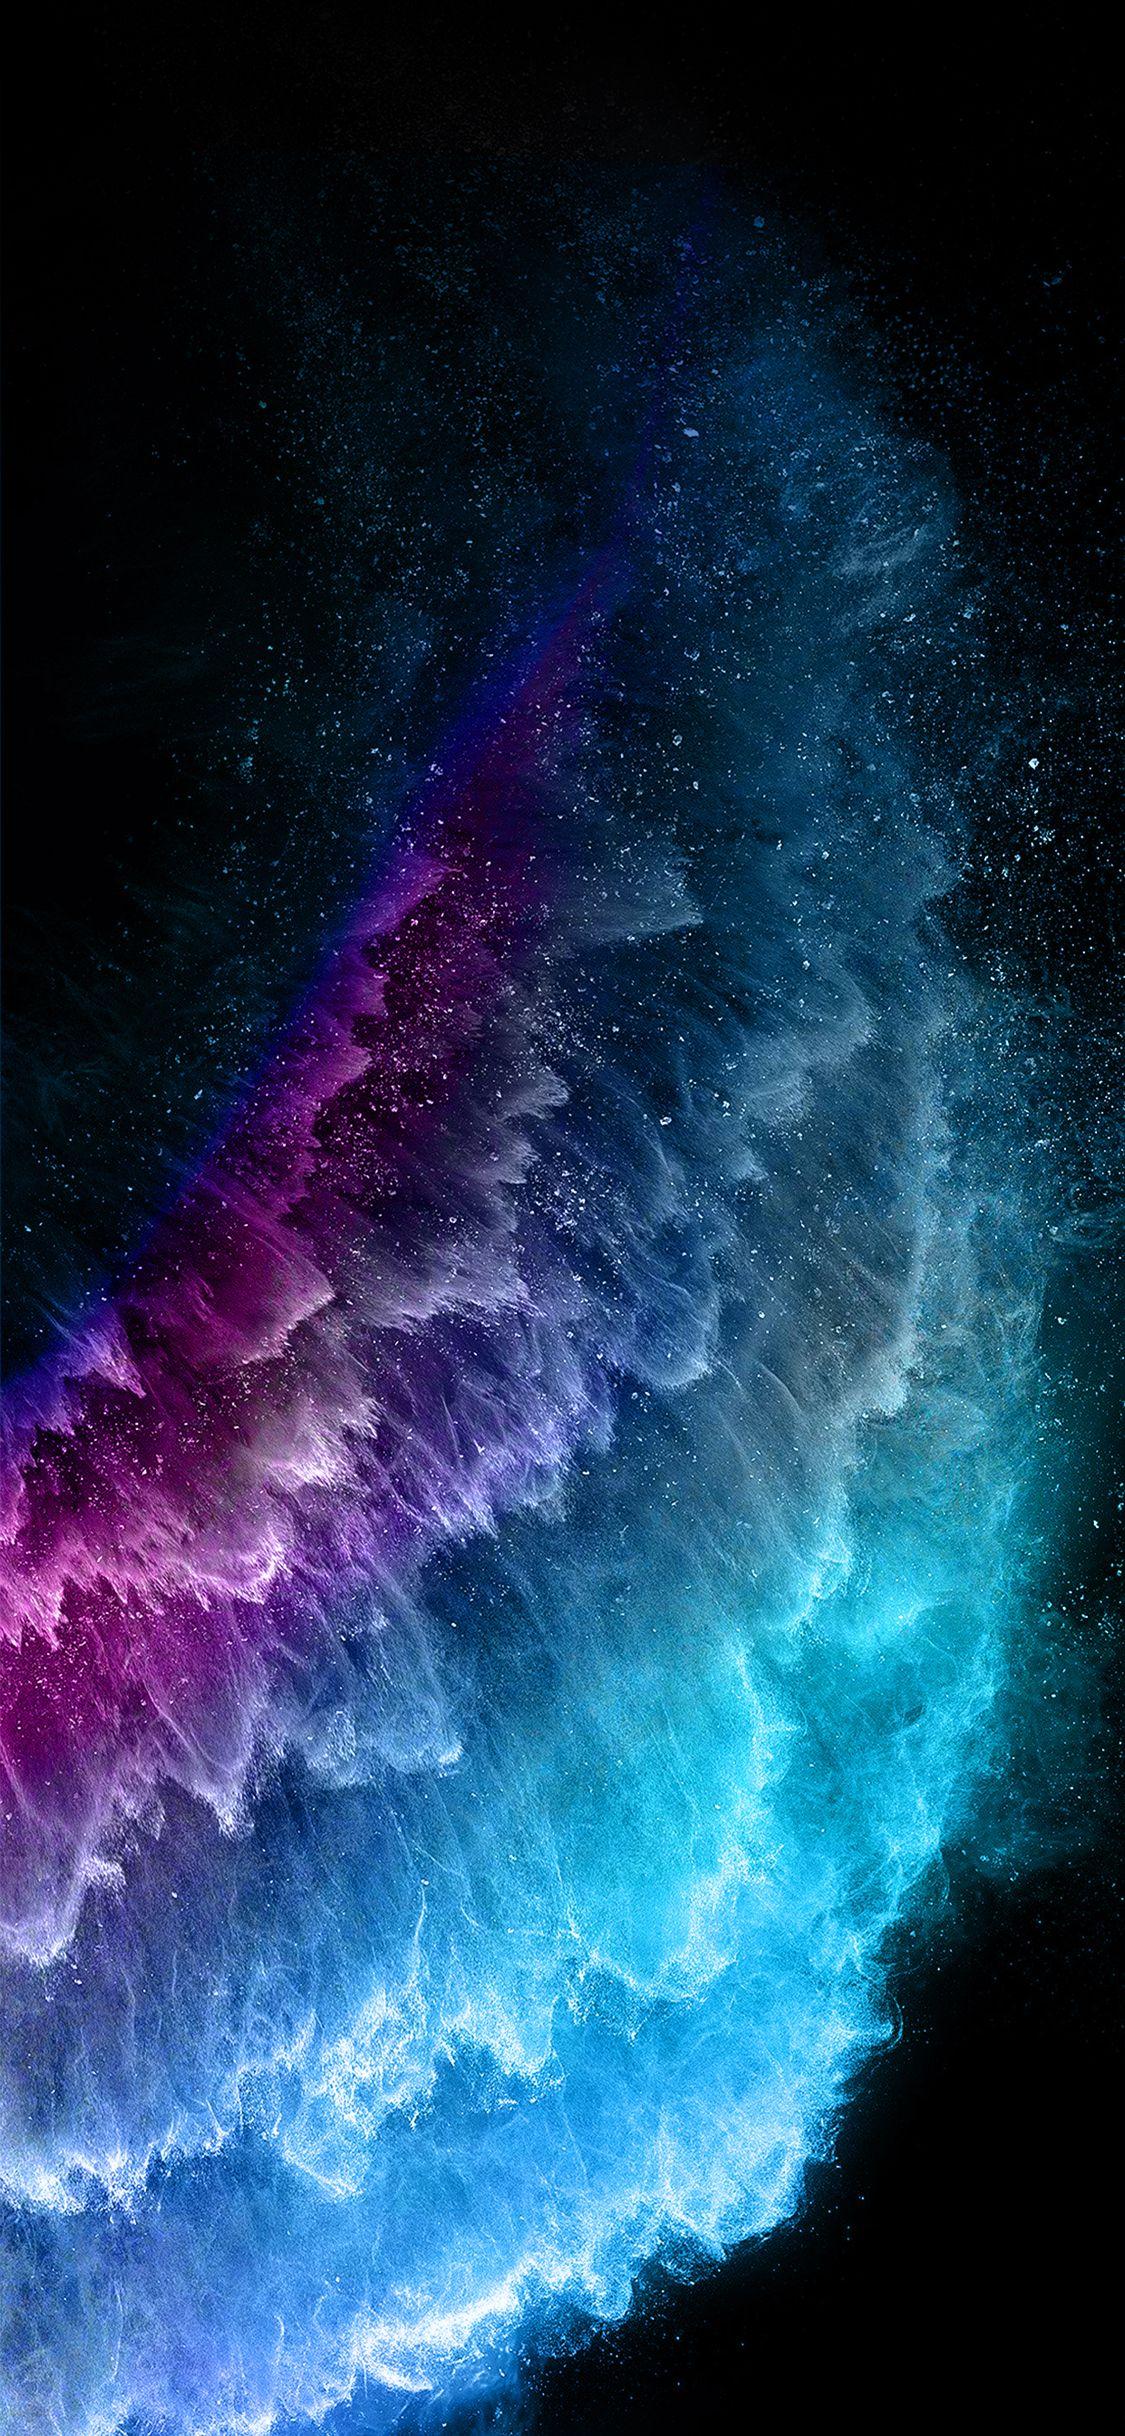 iOS13 #apple #iphone11 #iphonewallpaper #abstract #abstractart